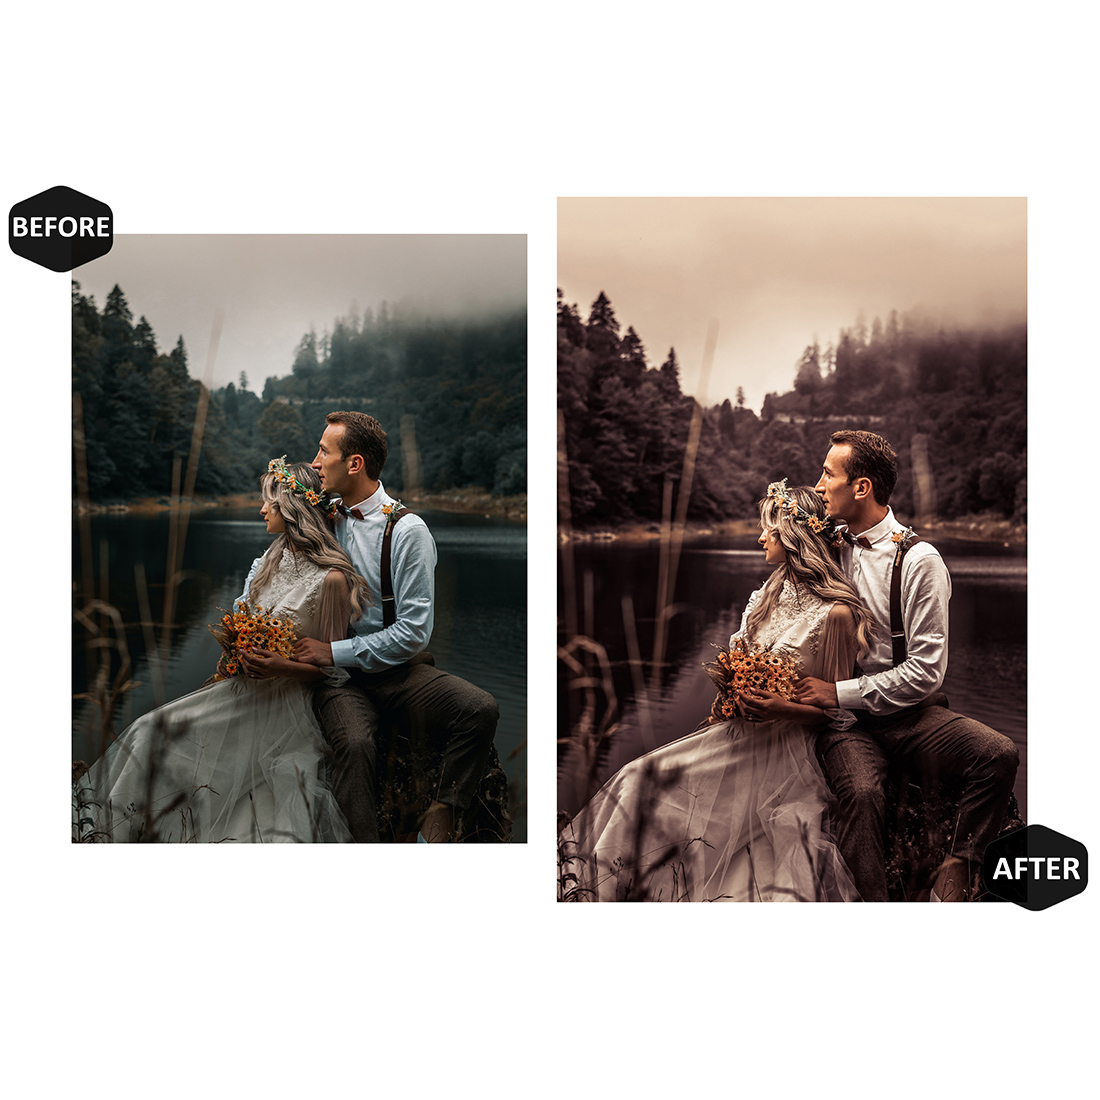 12 Photoshop Actions, Bohemian Lovely Ps Action, Bright ACR Preset, Cool Dark Ps Filter, Boho Pictures And style Theme For Instagram, Blogger preview image.